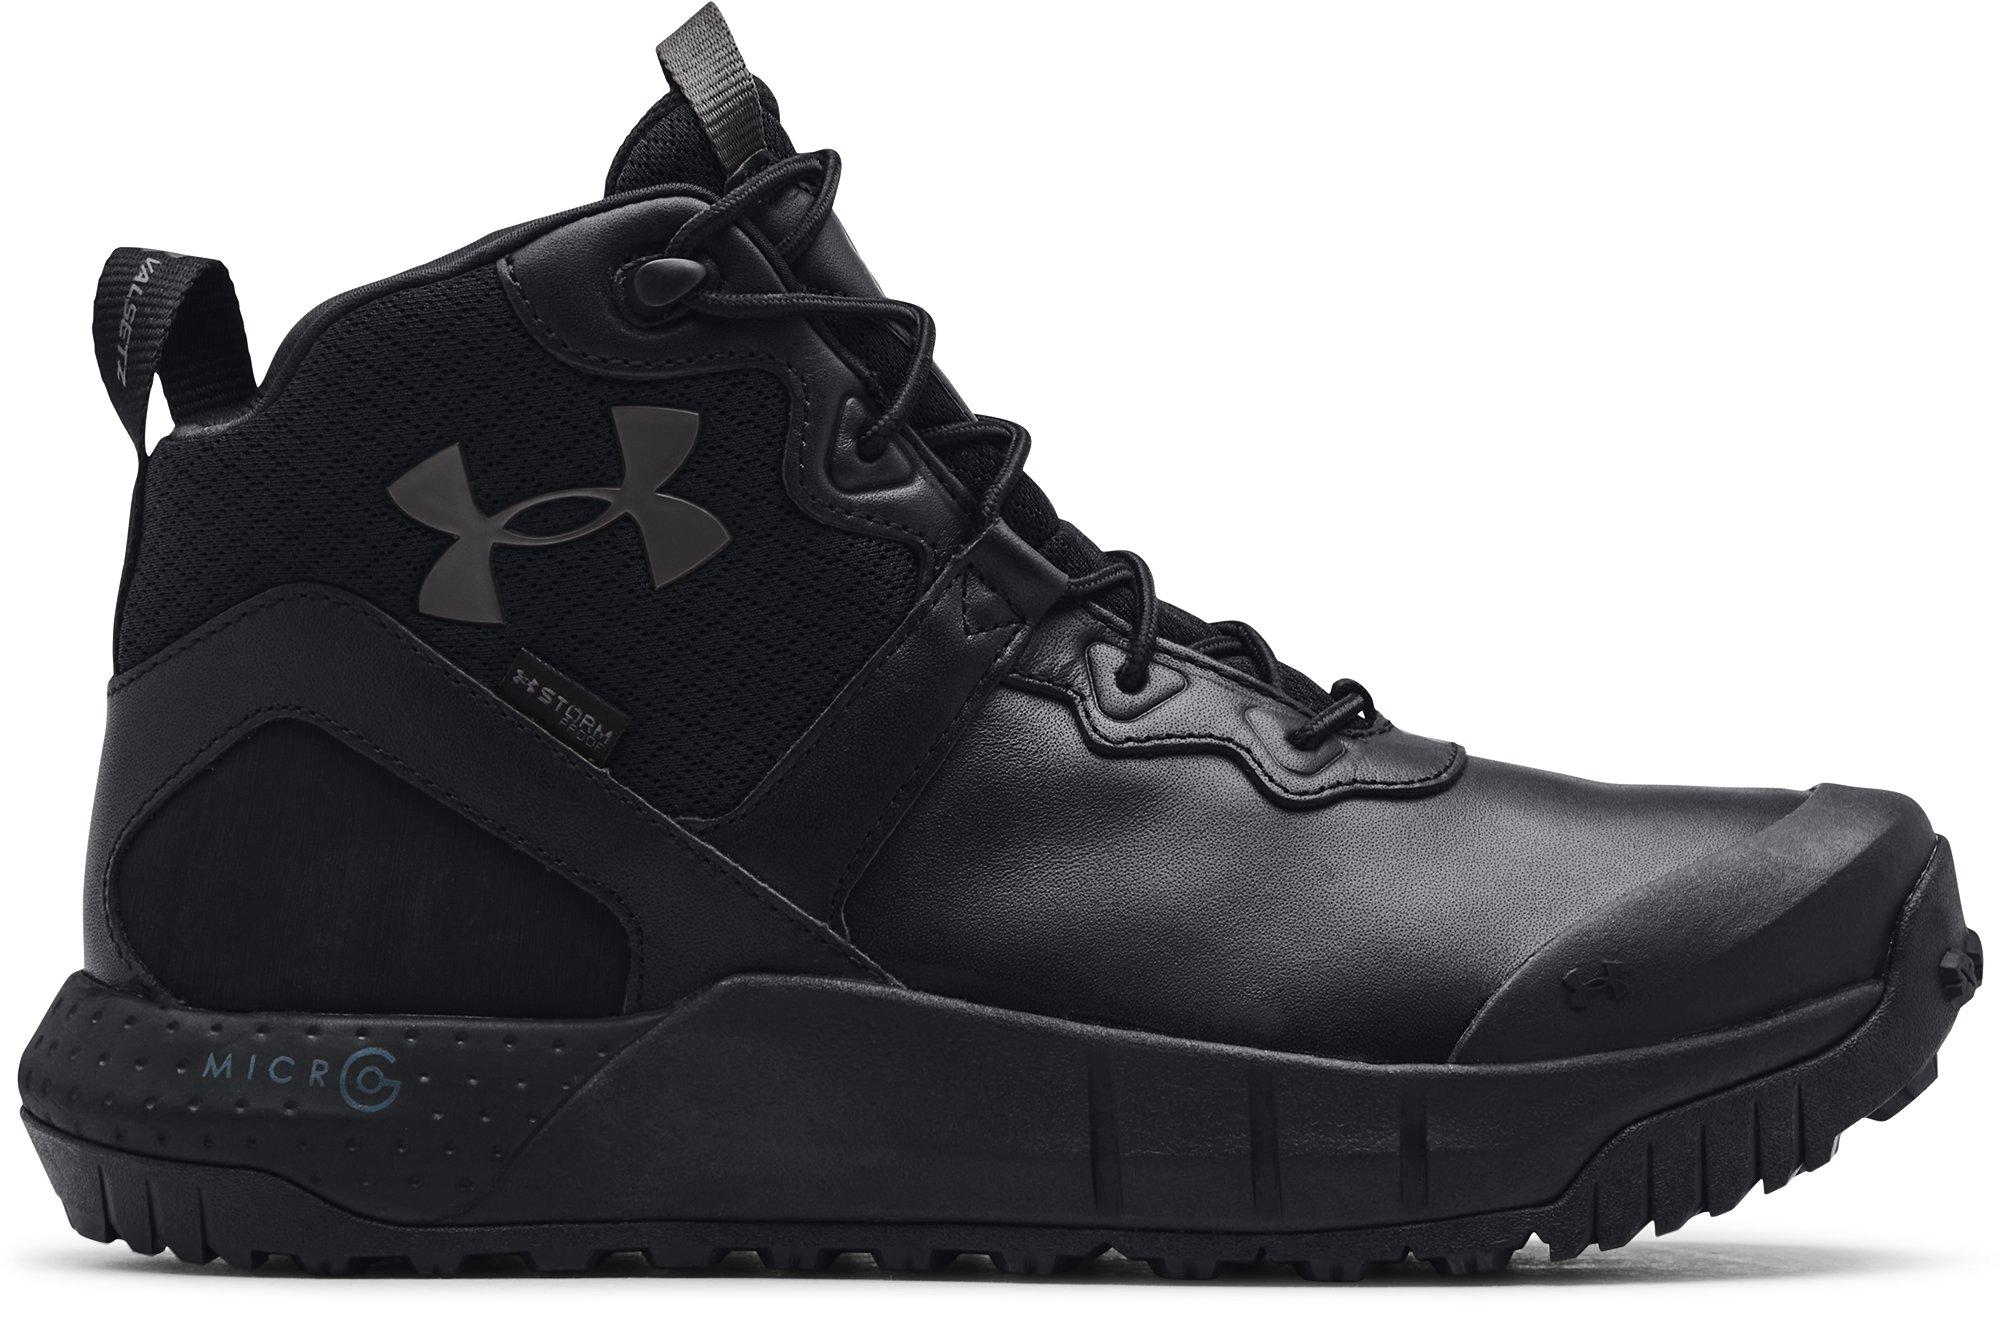 Under Armour Ua Micro G® Valsetz Mid Leather Waterproof Tactical Boots ...